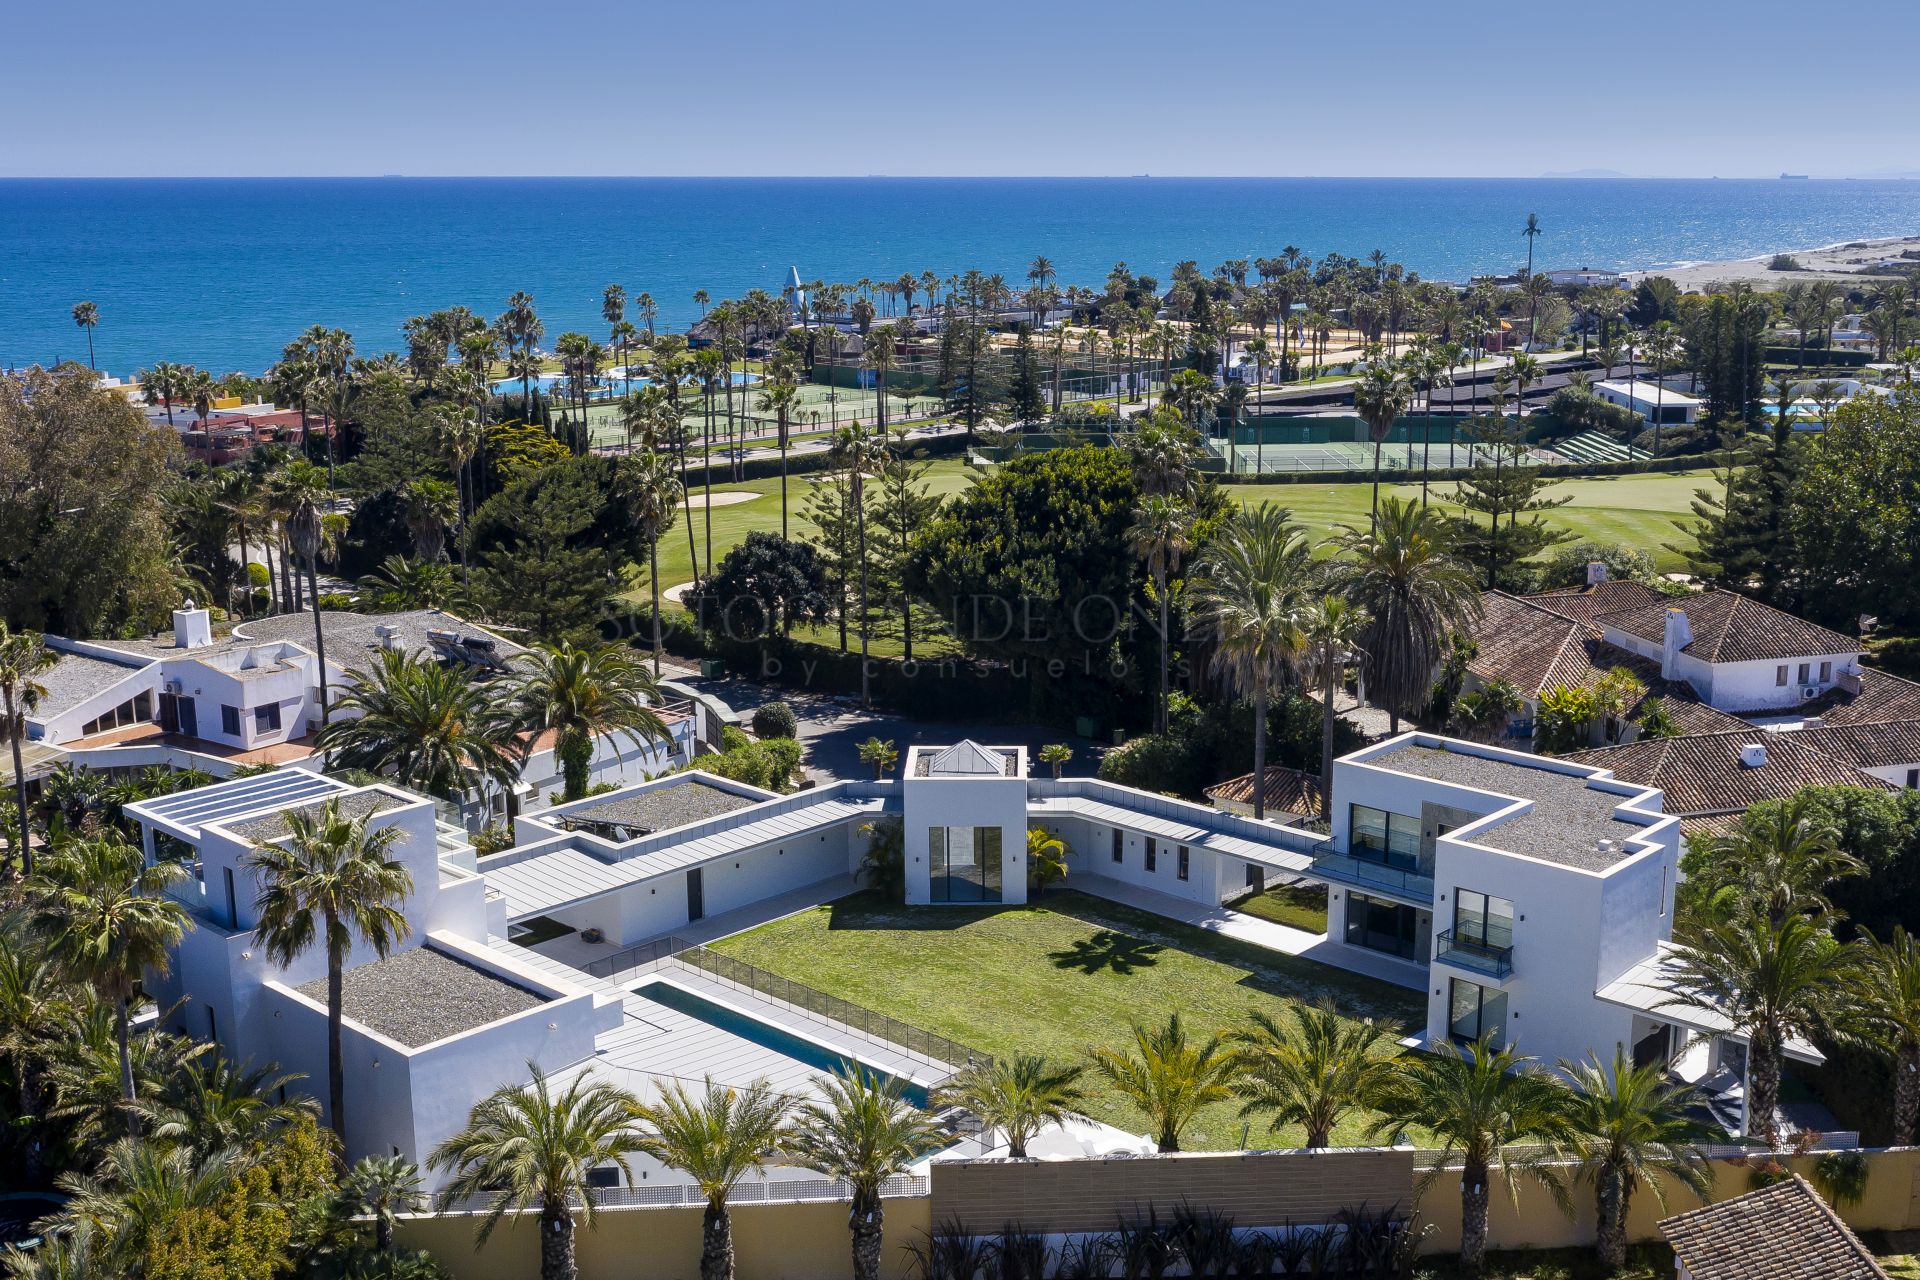 A Magnificent example of Modern Architecture as it’s best. Kings & Queens, Sotogrande Costa.